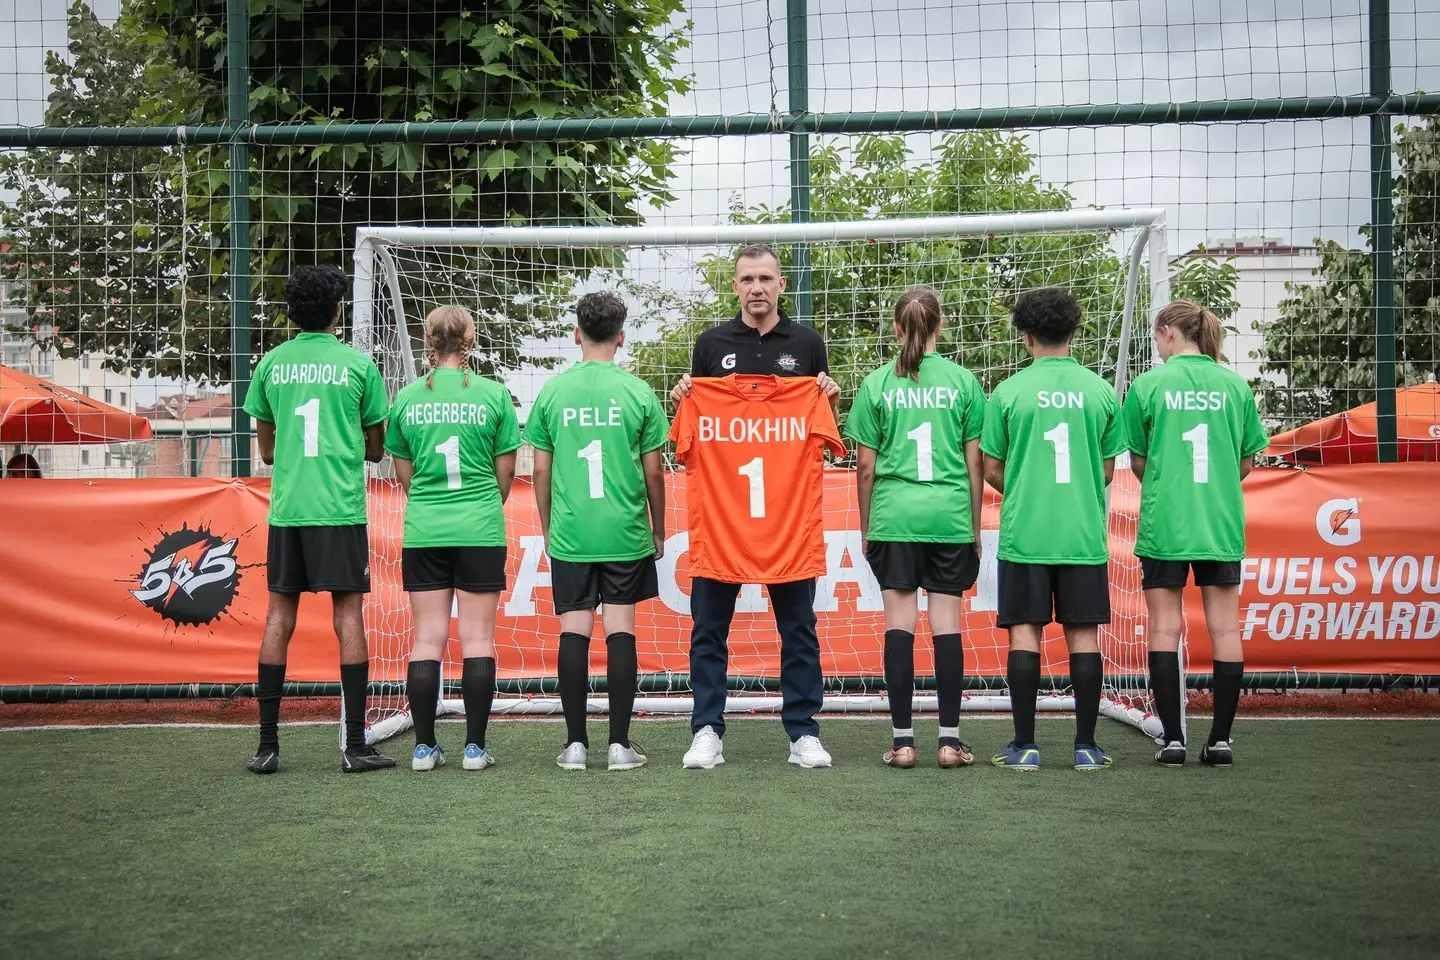 Andriy Shevchenko and young players from Gatorade’s 5v5 global finals pay homage to their role models